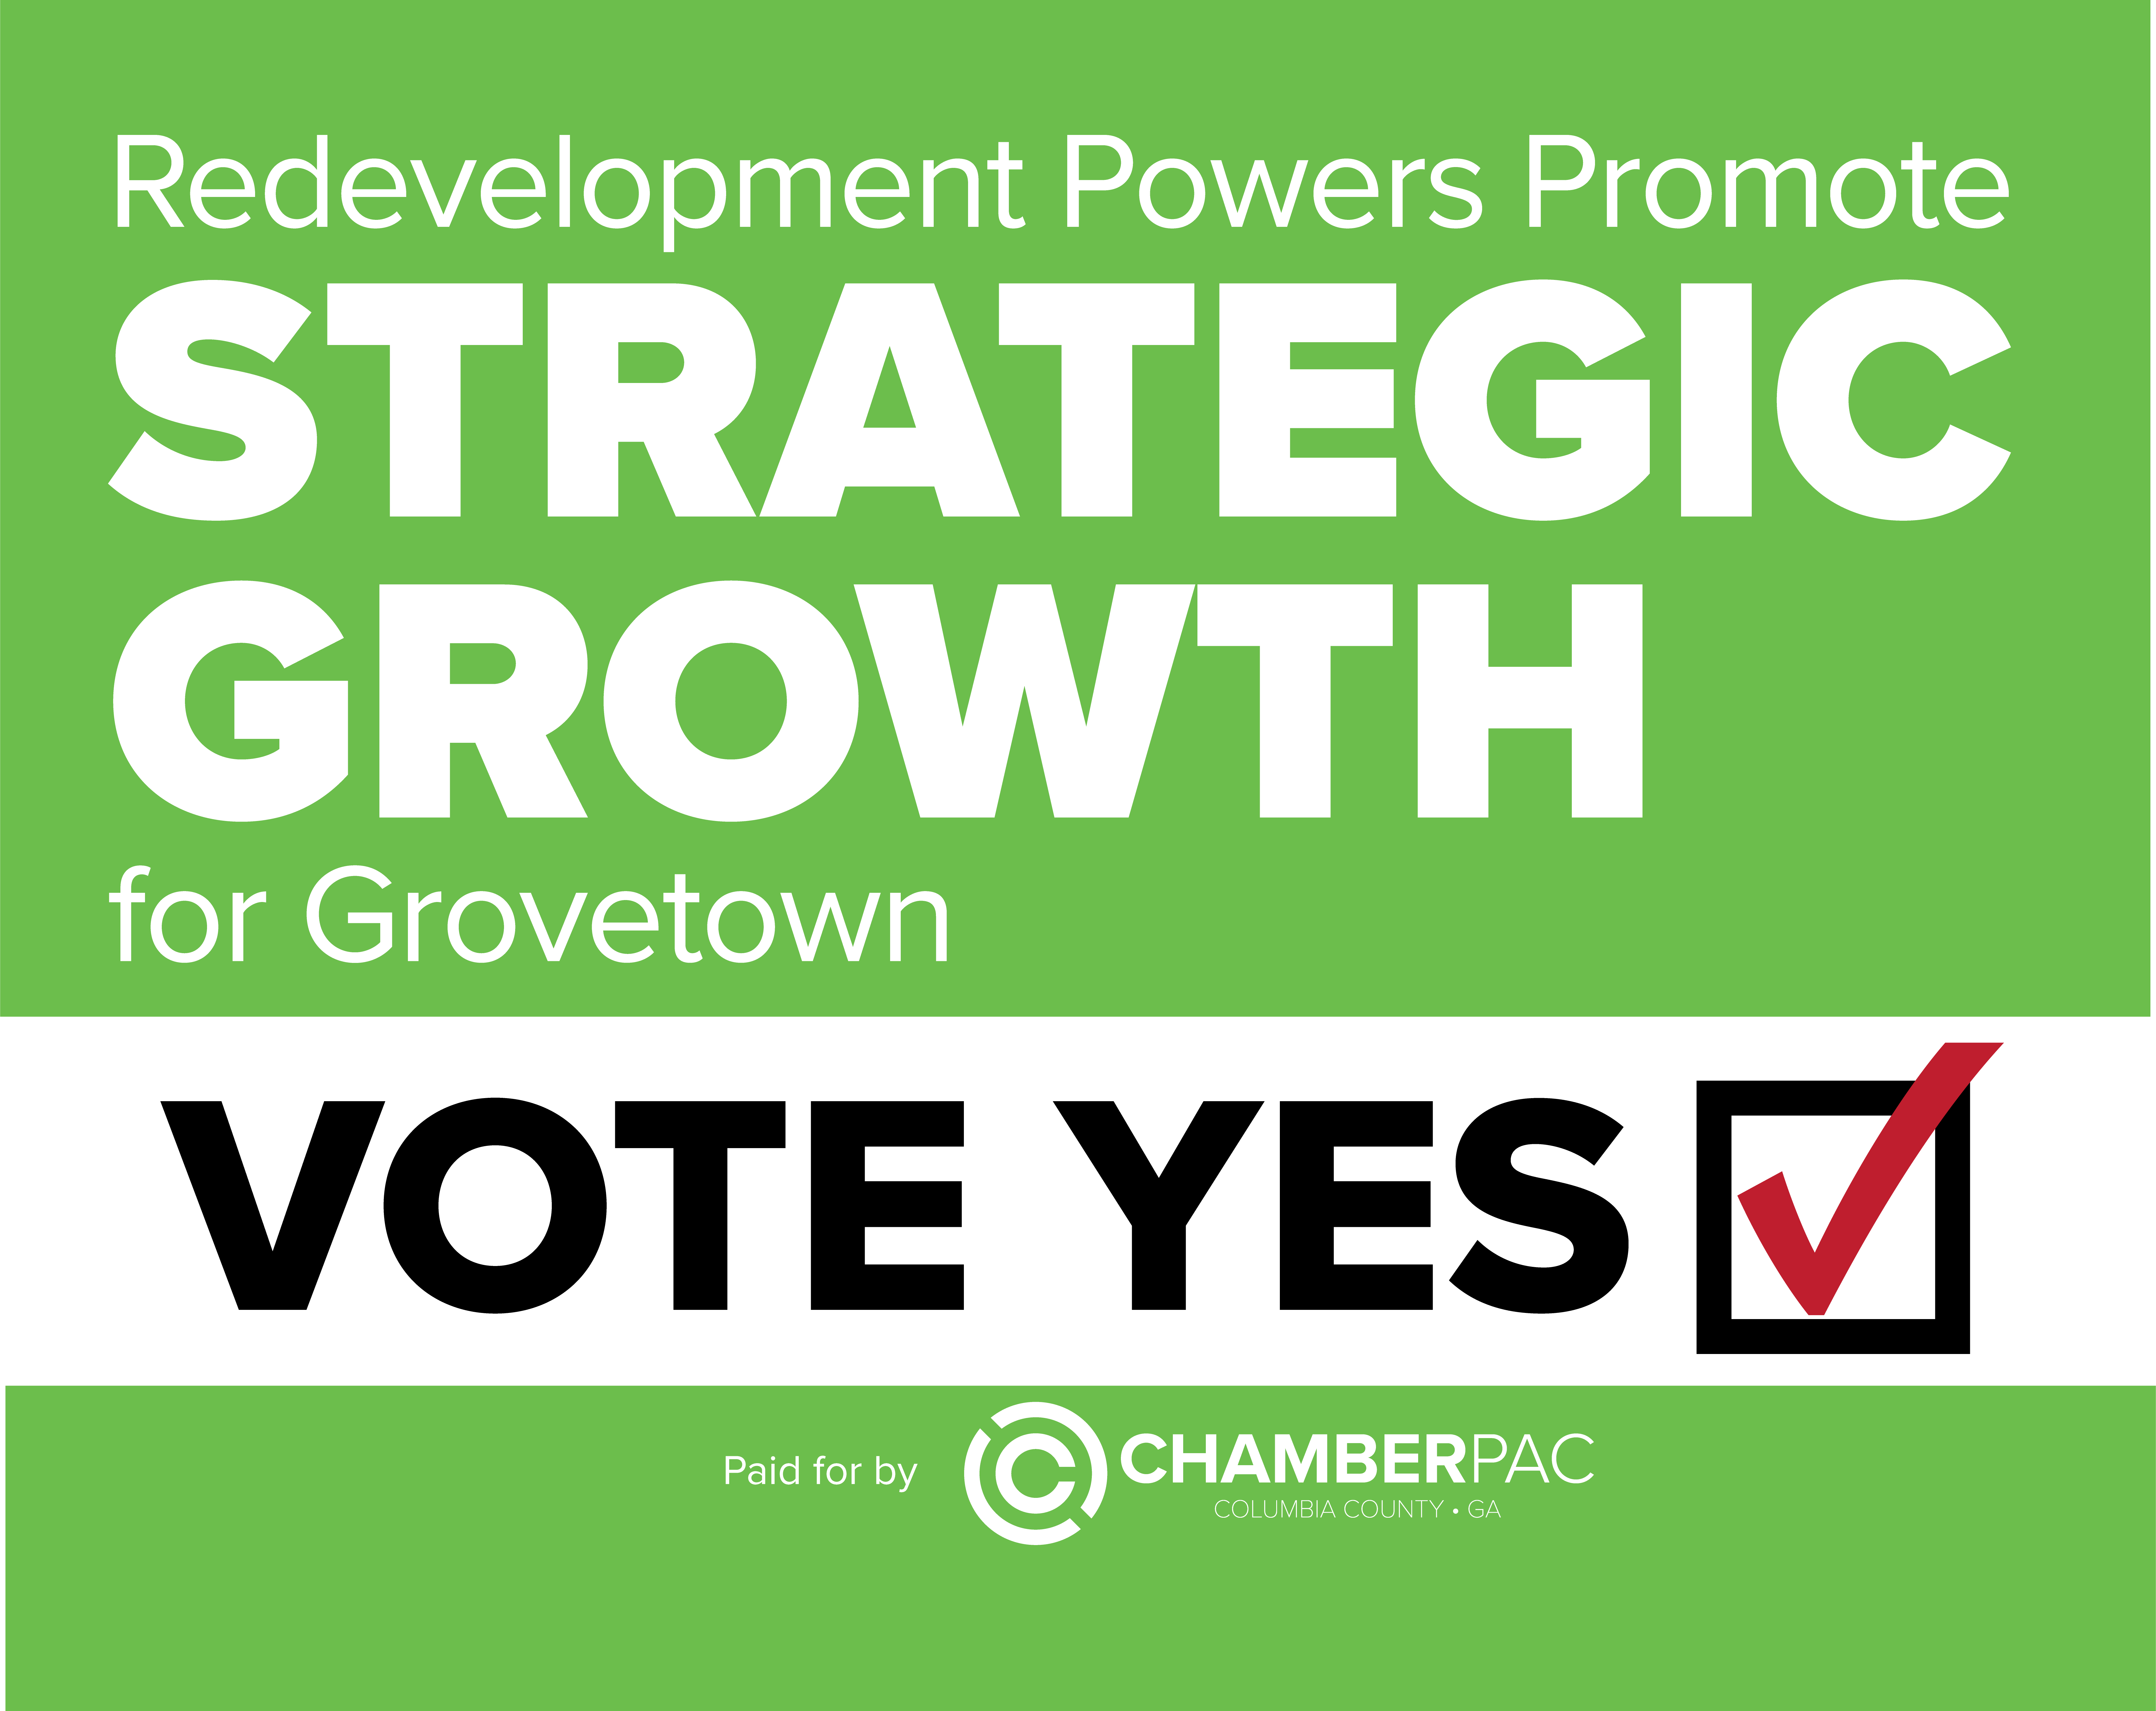 ChamberPAC: Vote YES on Redevelopment Powers for Grovetown